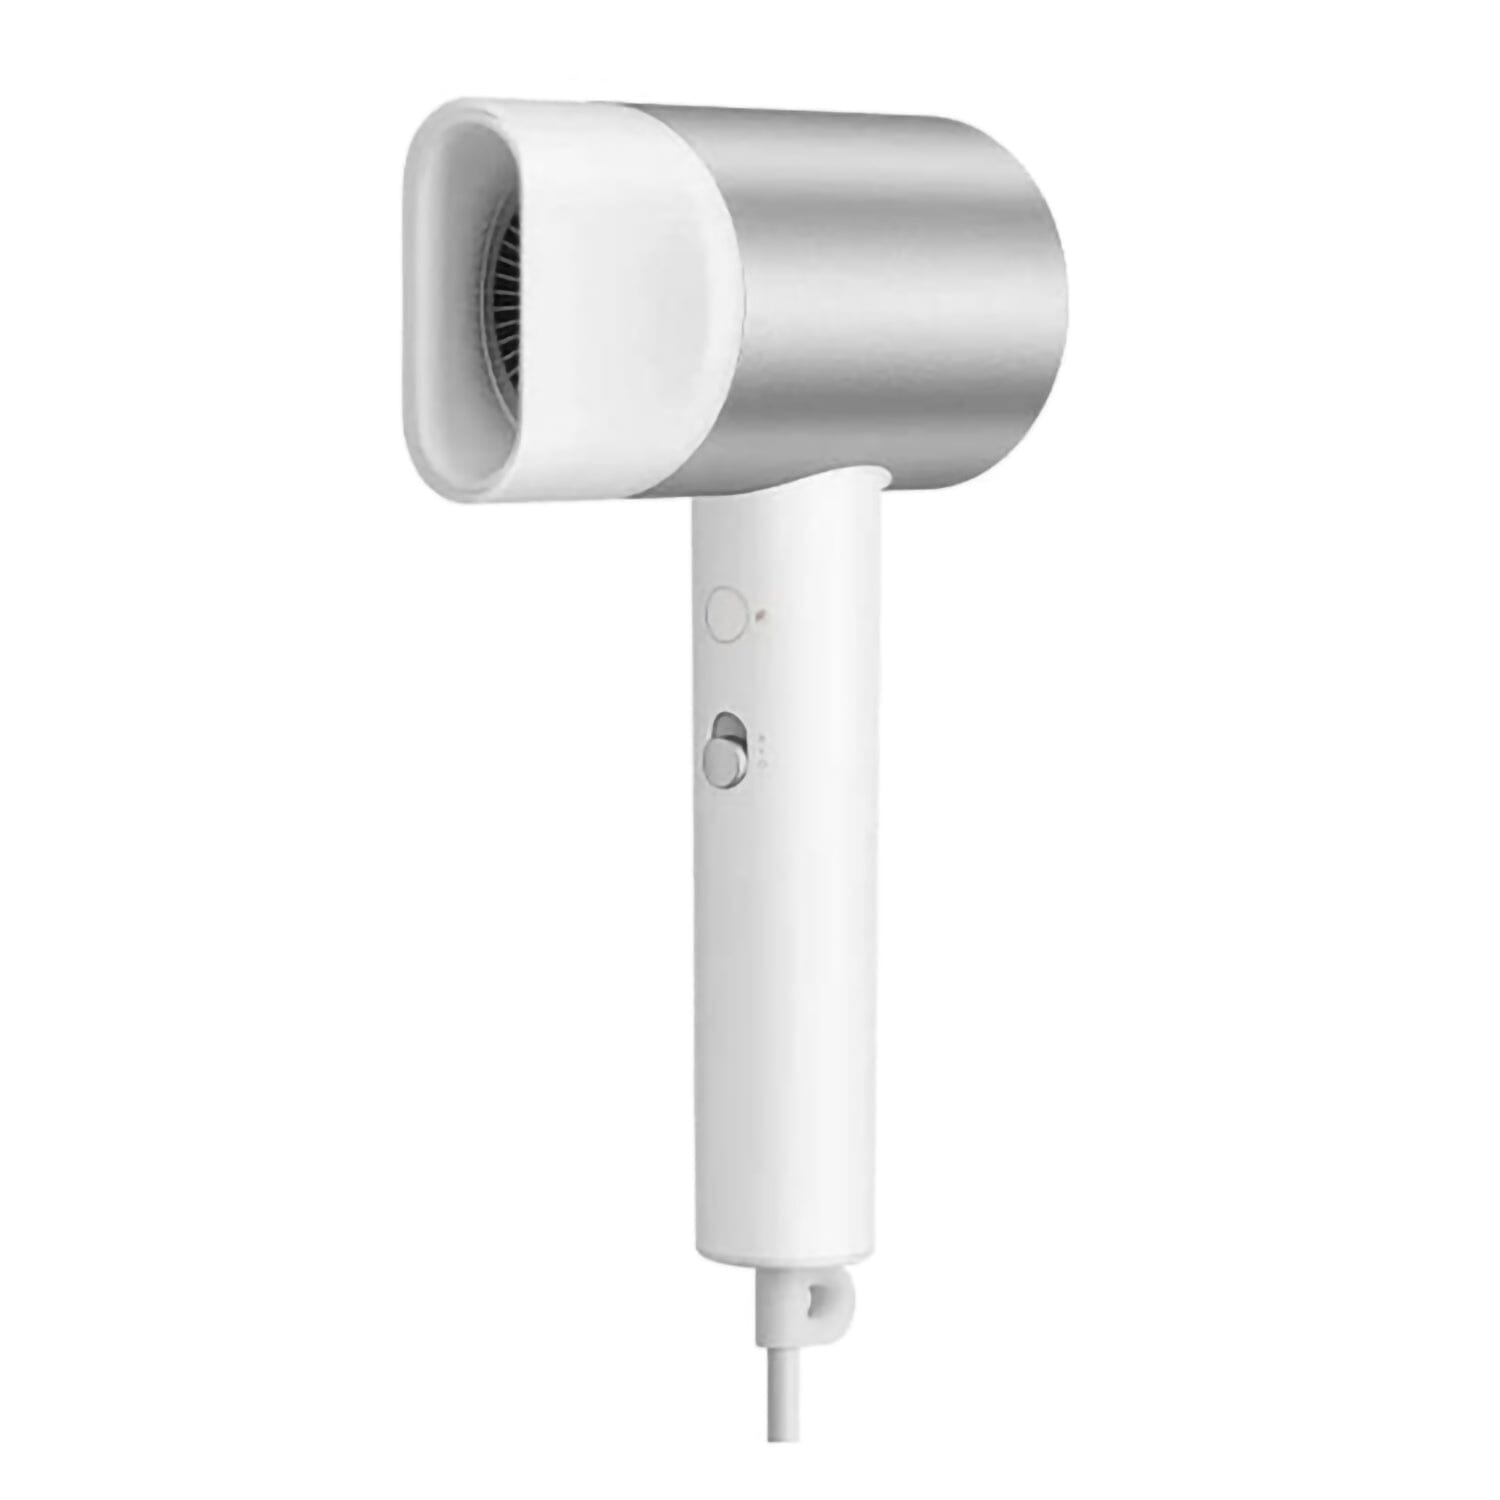 Xiaomi Water Ionic Hair Dryer H500 UK, Removable Air Intake Filter, 20,000 rpm and seven wing-shaped turbine blades [Local Official Warranty] Xiaomi 